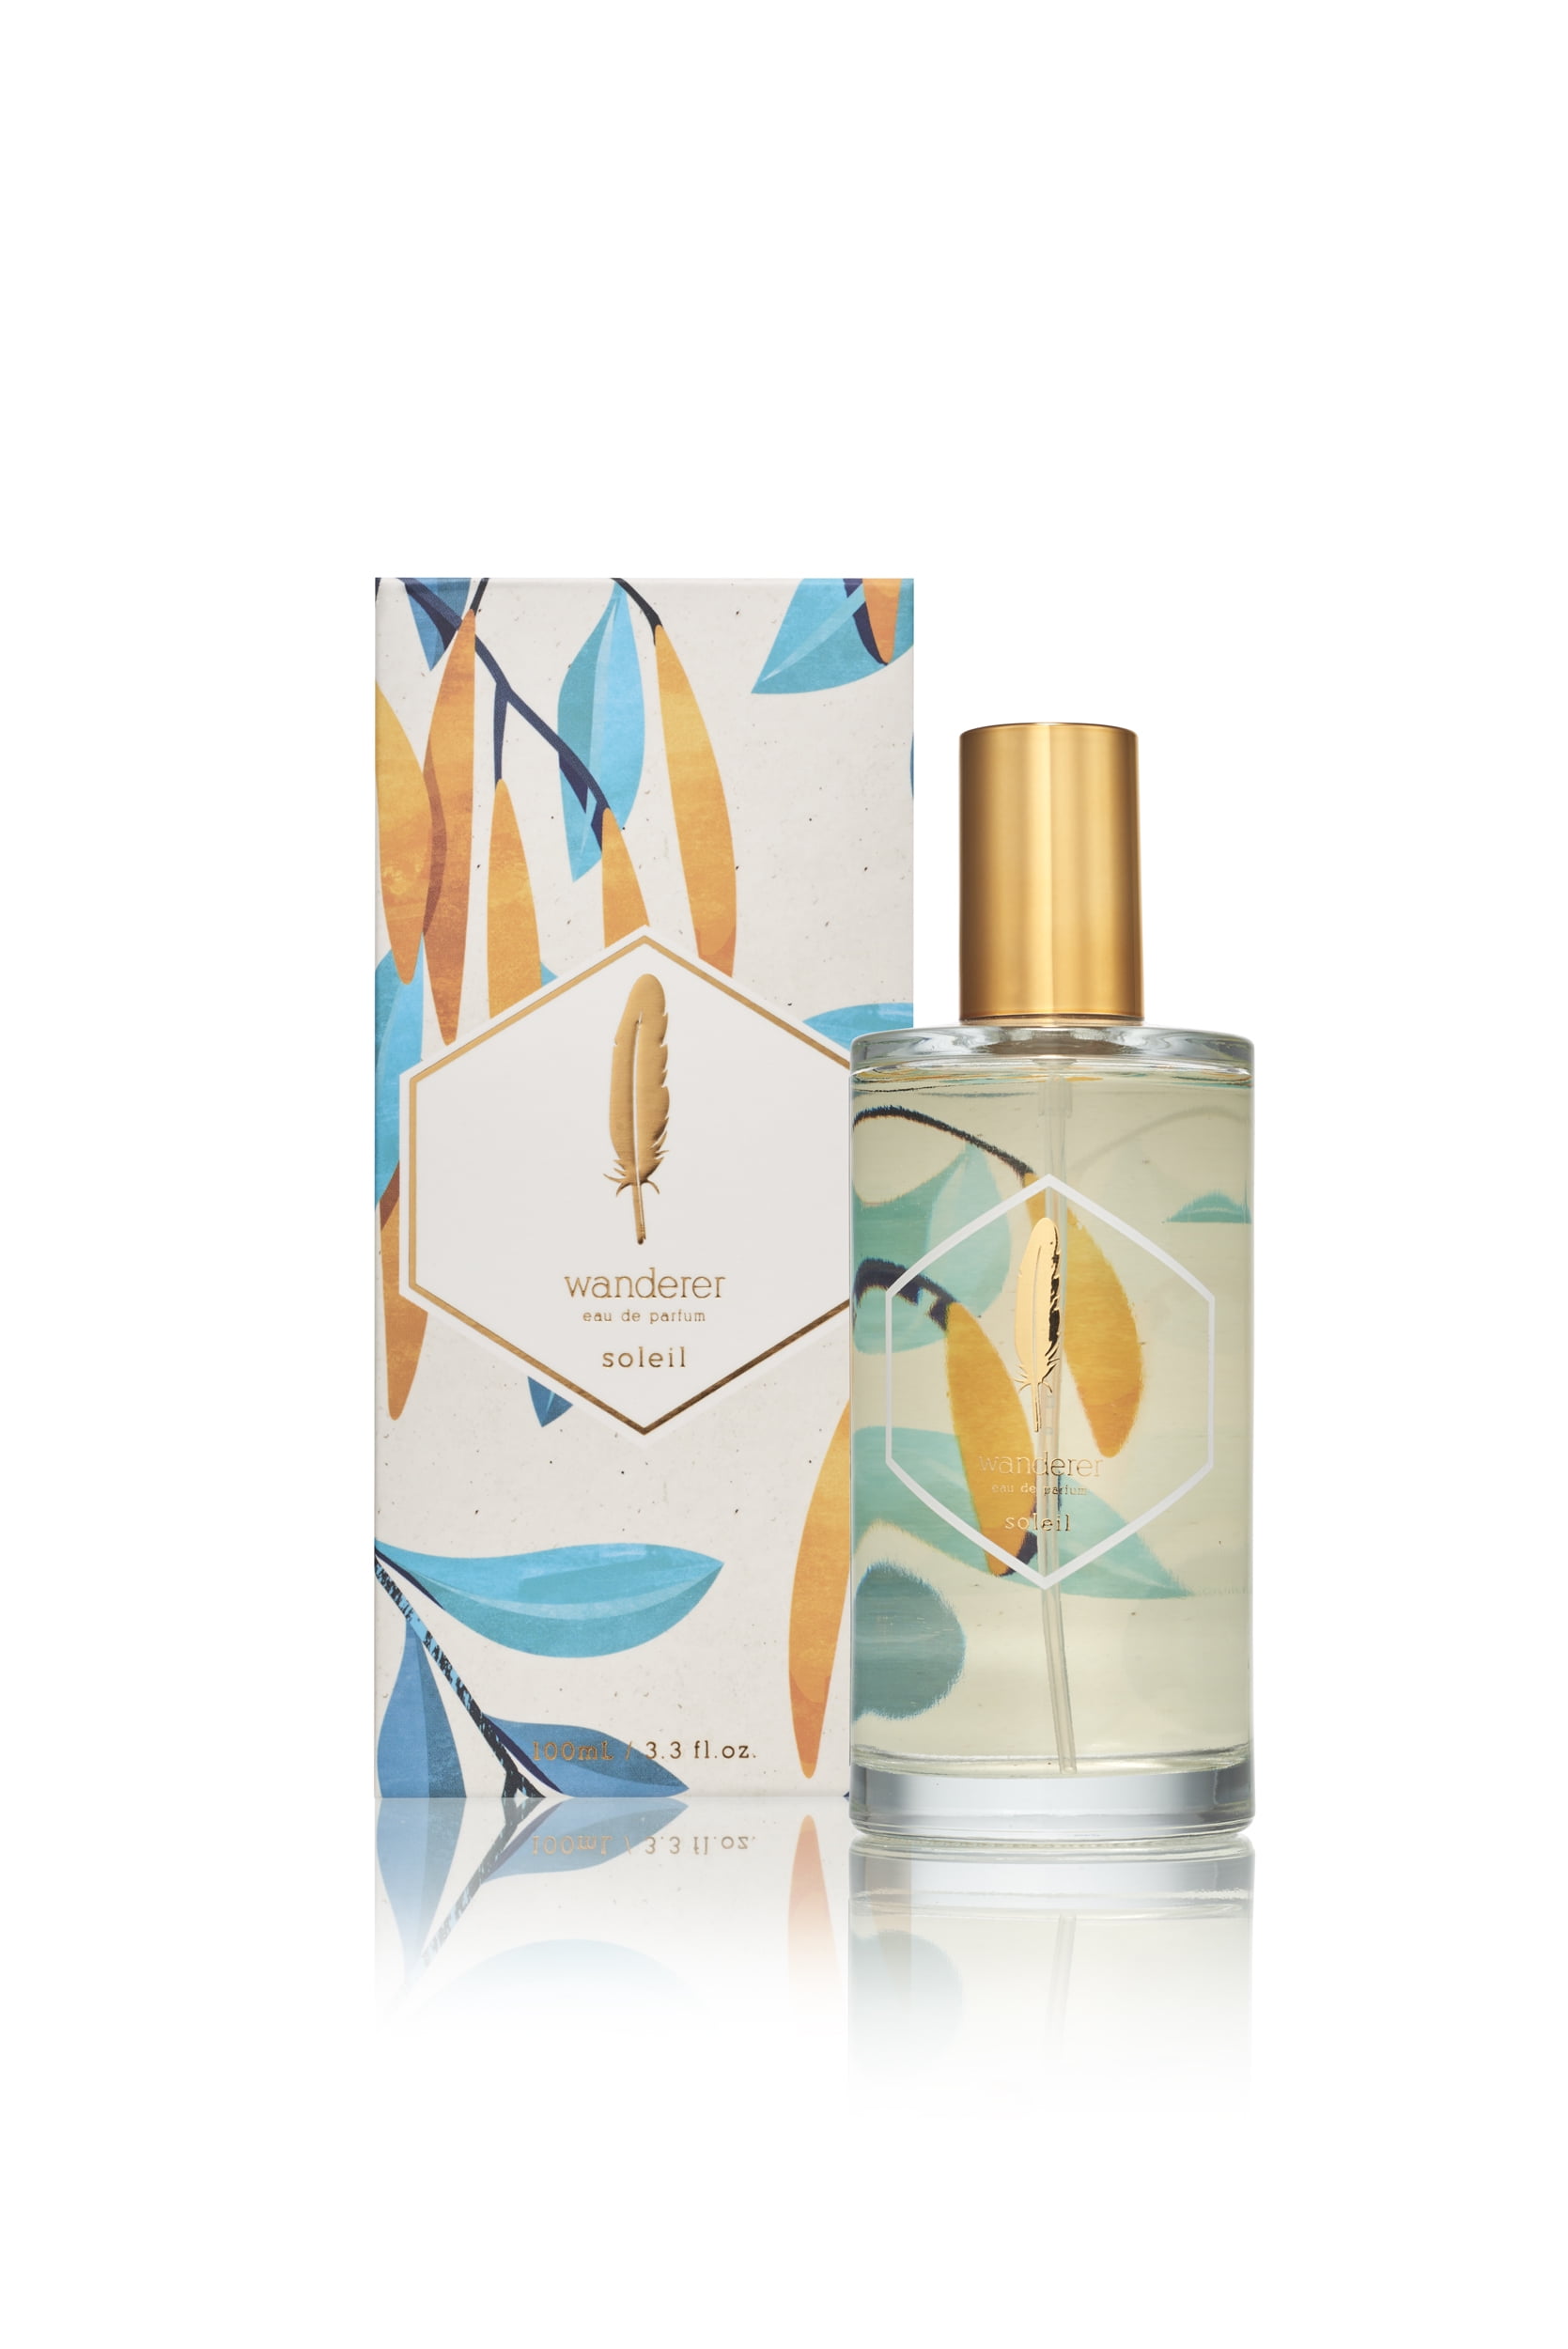 Wanderer Perfume Fall Inspired Perfume With Notes of